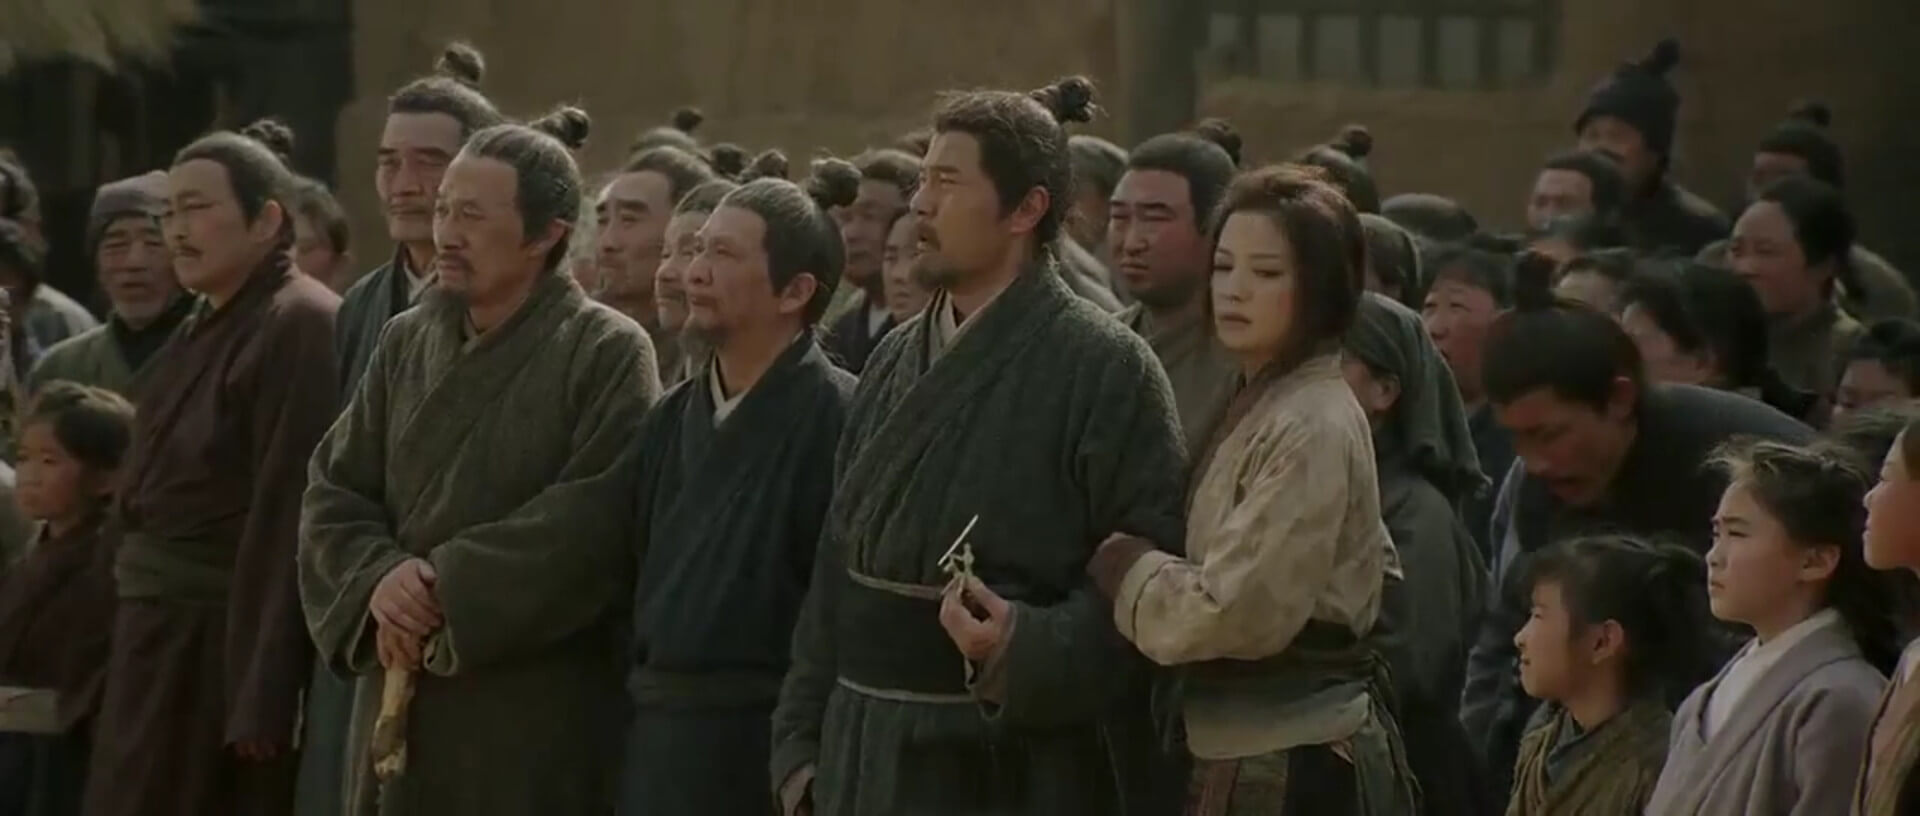 Mulan stands next to her father, Hua Hu, as he receives his conscription orders.